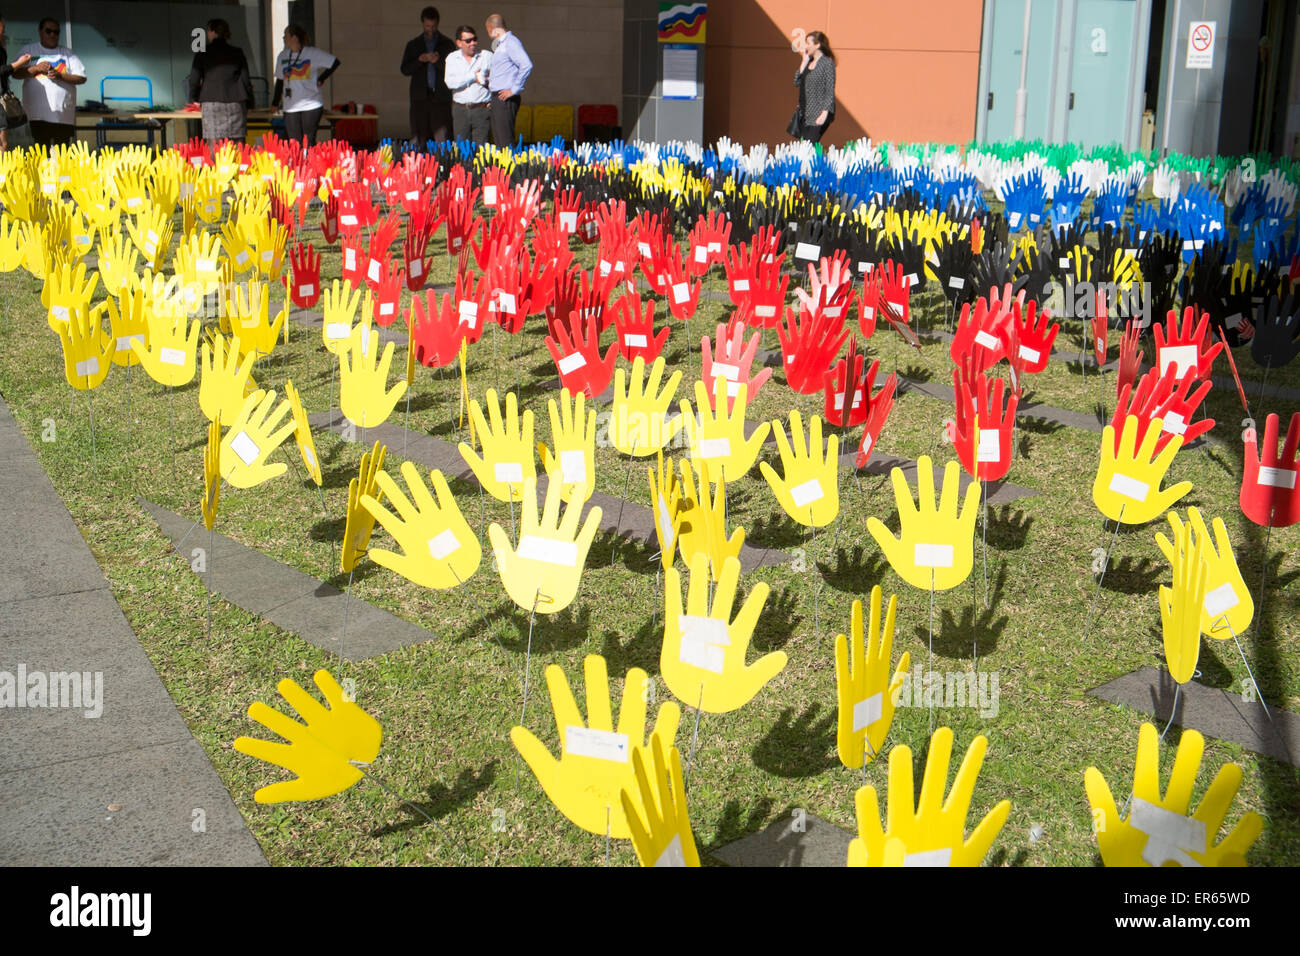 Sydney, Australia. 28th May, 2015. This national event brings together Aboriginal and Torres Strait Islander peoples with other Australians and is framed around the 1967 referendum on rights and the 1992 High Court mabo decision on native land title.Here Sea of Hands display in Chippendale,Sydney Credit:  model10/Alamy Live News Stock Photo